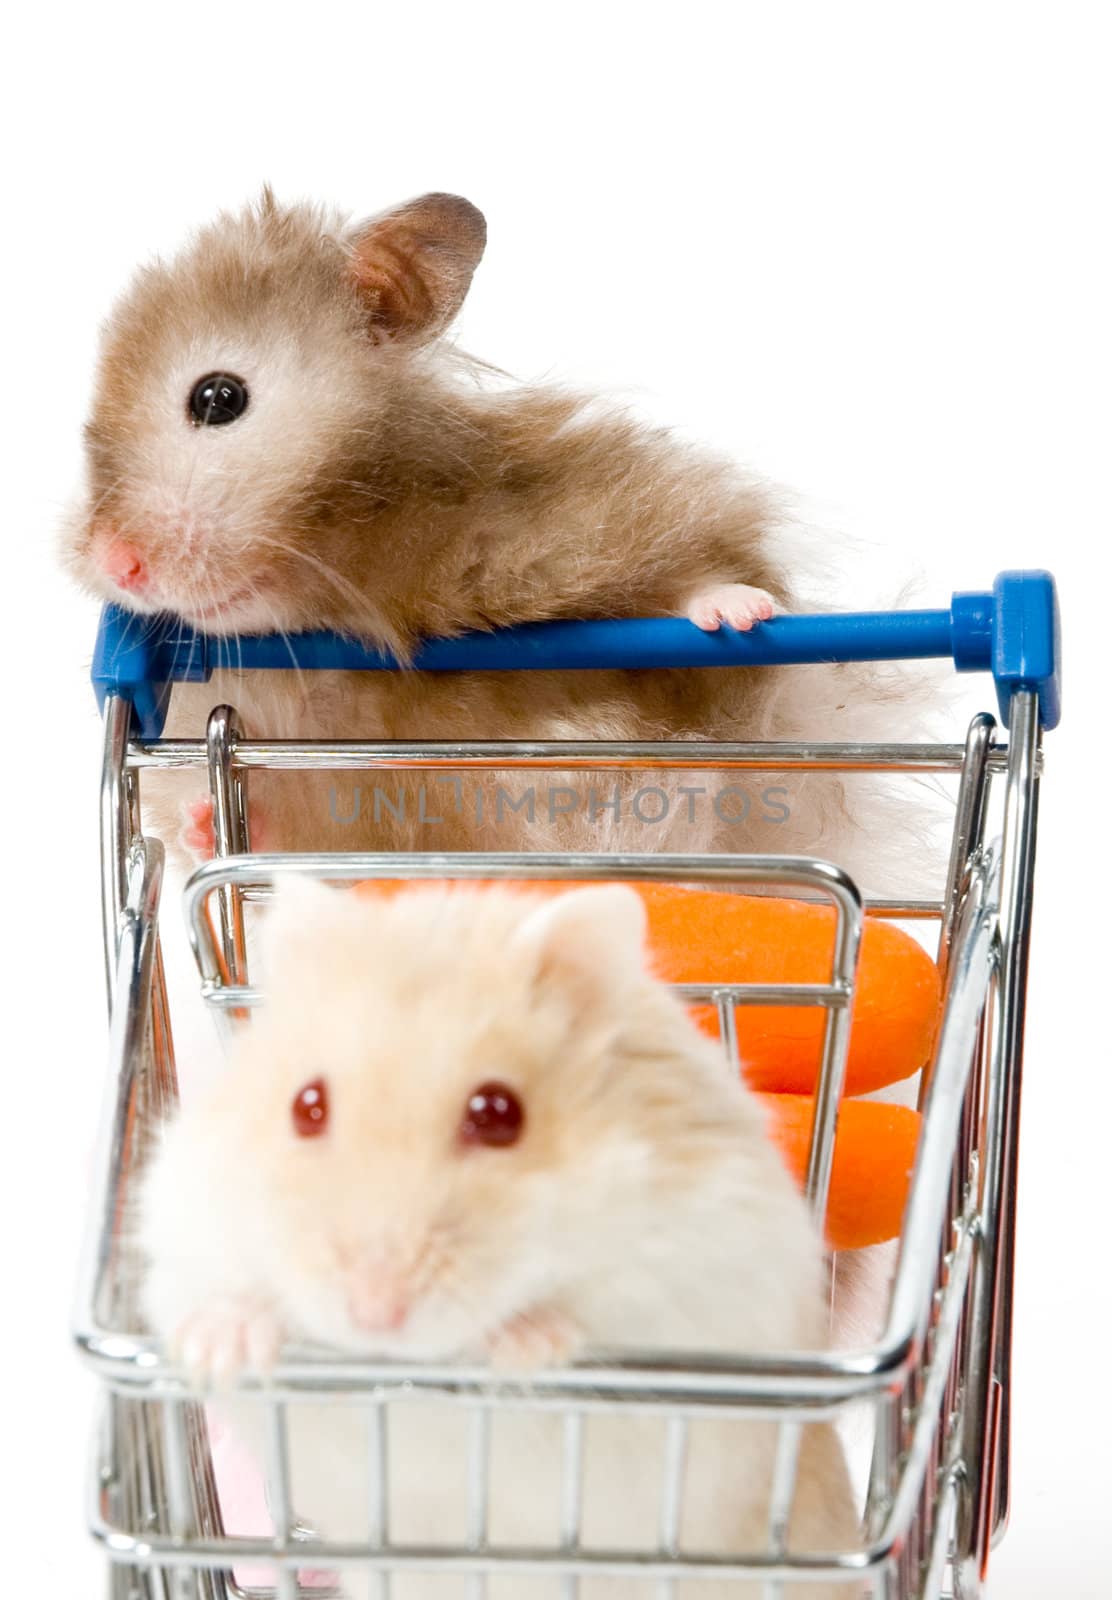 Big hamster is making shopping with little hamster by ladyminnie